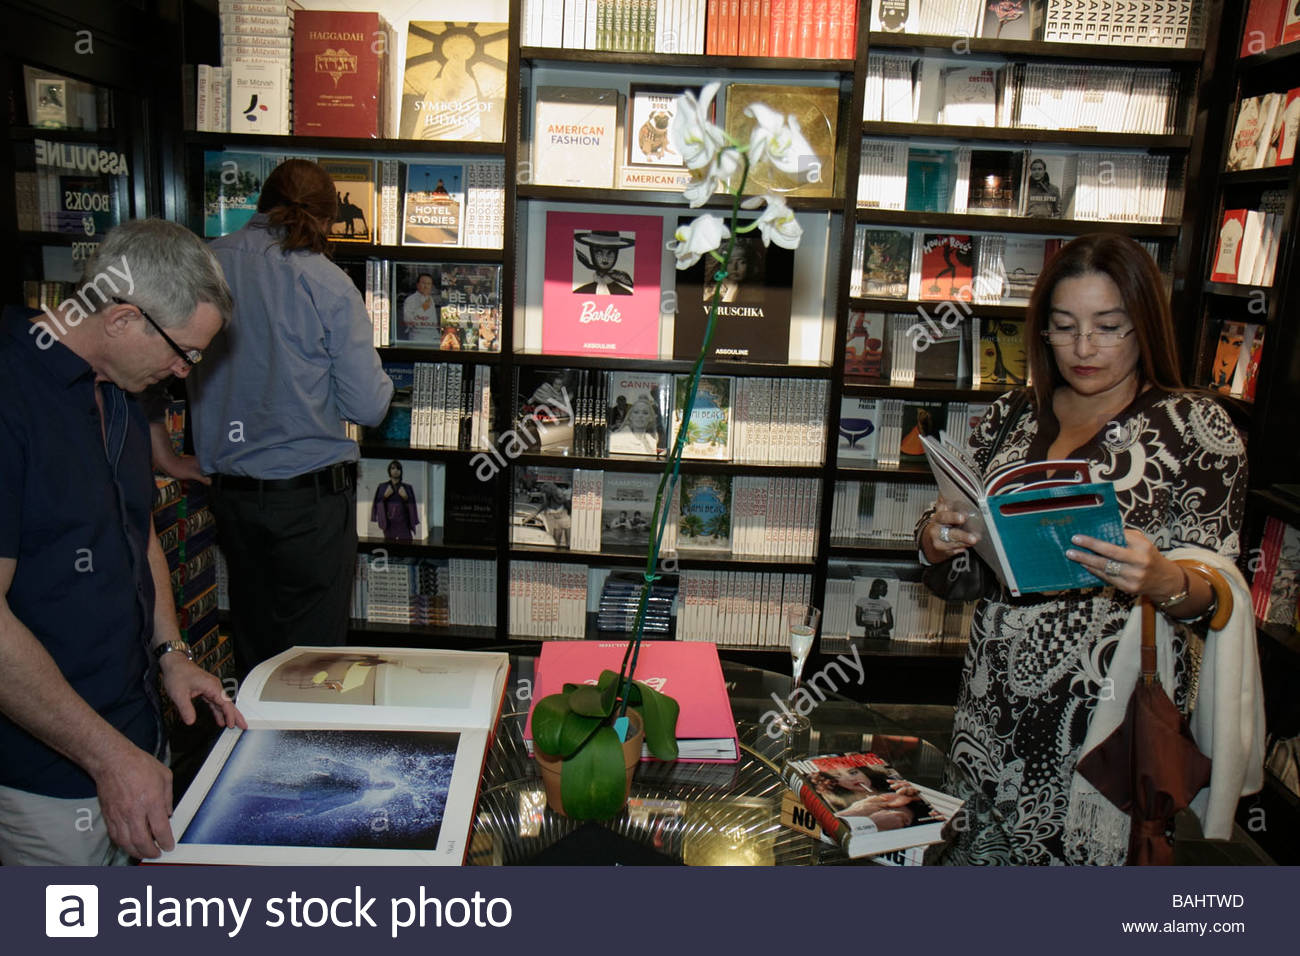 Image result for lincoln road bookstore